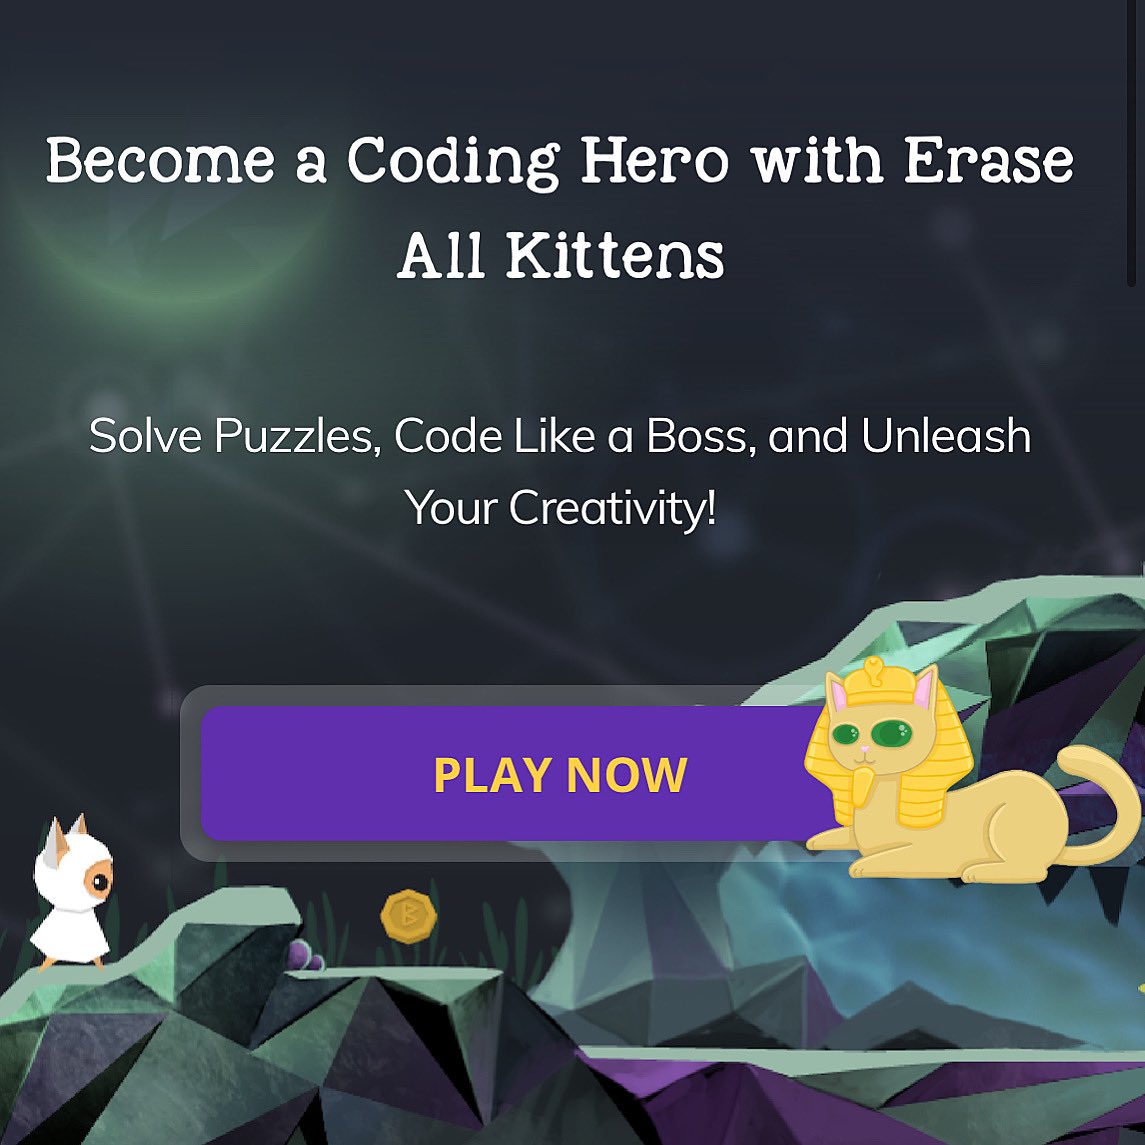 Happy Friday! We’ve just launched our new website and gaming features 👾 Kids can now choose their own kitten avatar and track their progress in EAK! Try it out at EraseAllKittens.com (7-12)